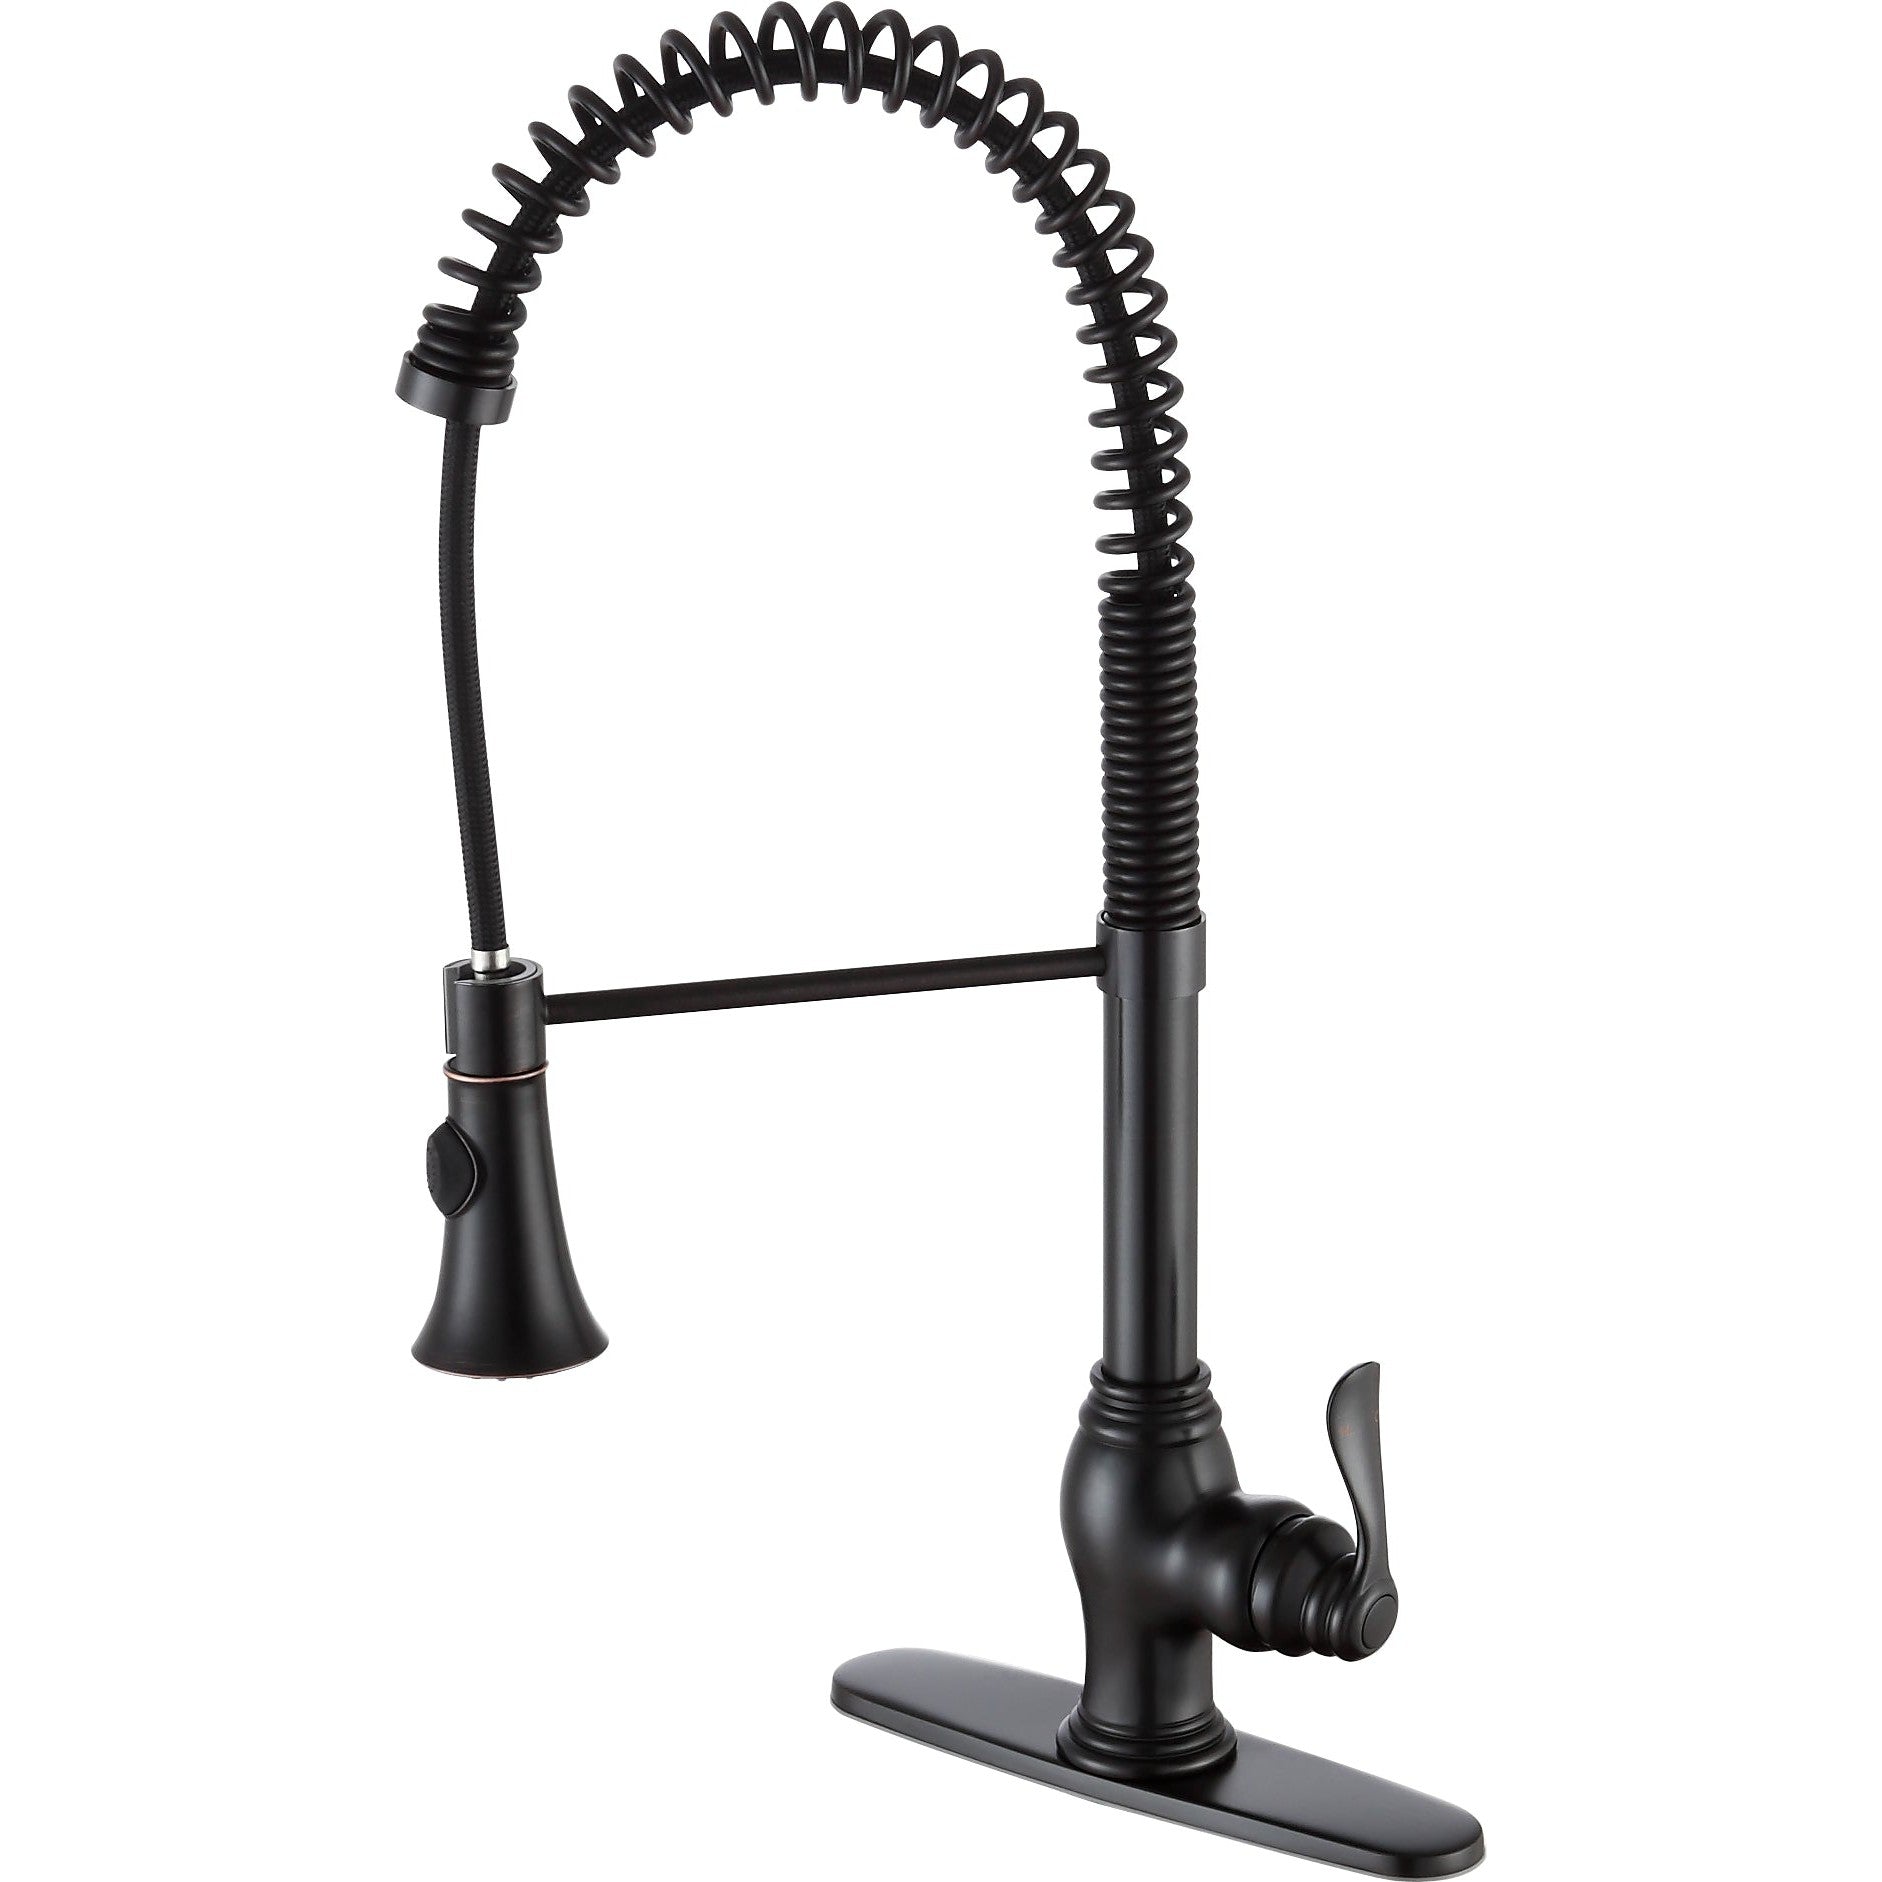 ANZZI Bastion Series Single Hole Oil Rubbed Bronze Kitchen Faucet With Euro-Grip Pull Down Sprayer